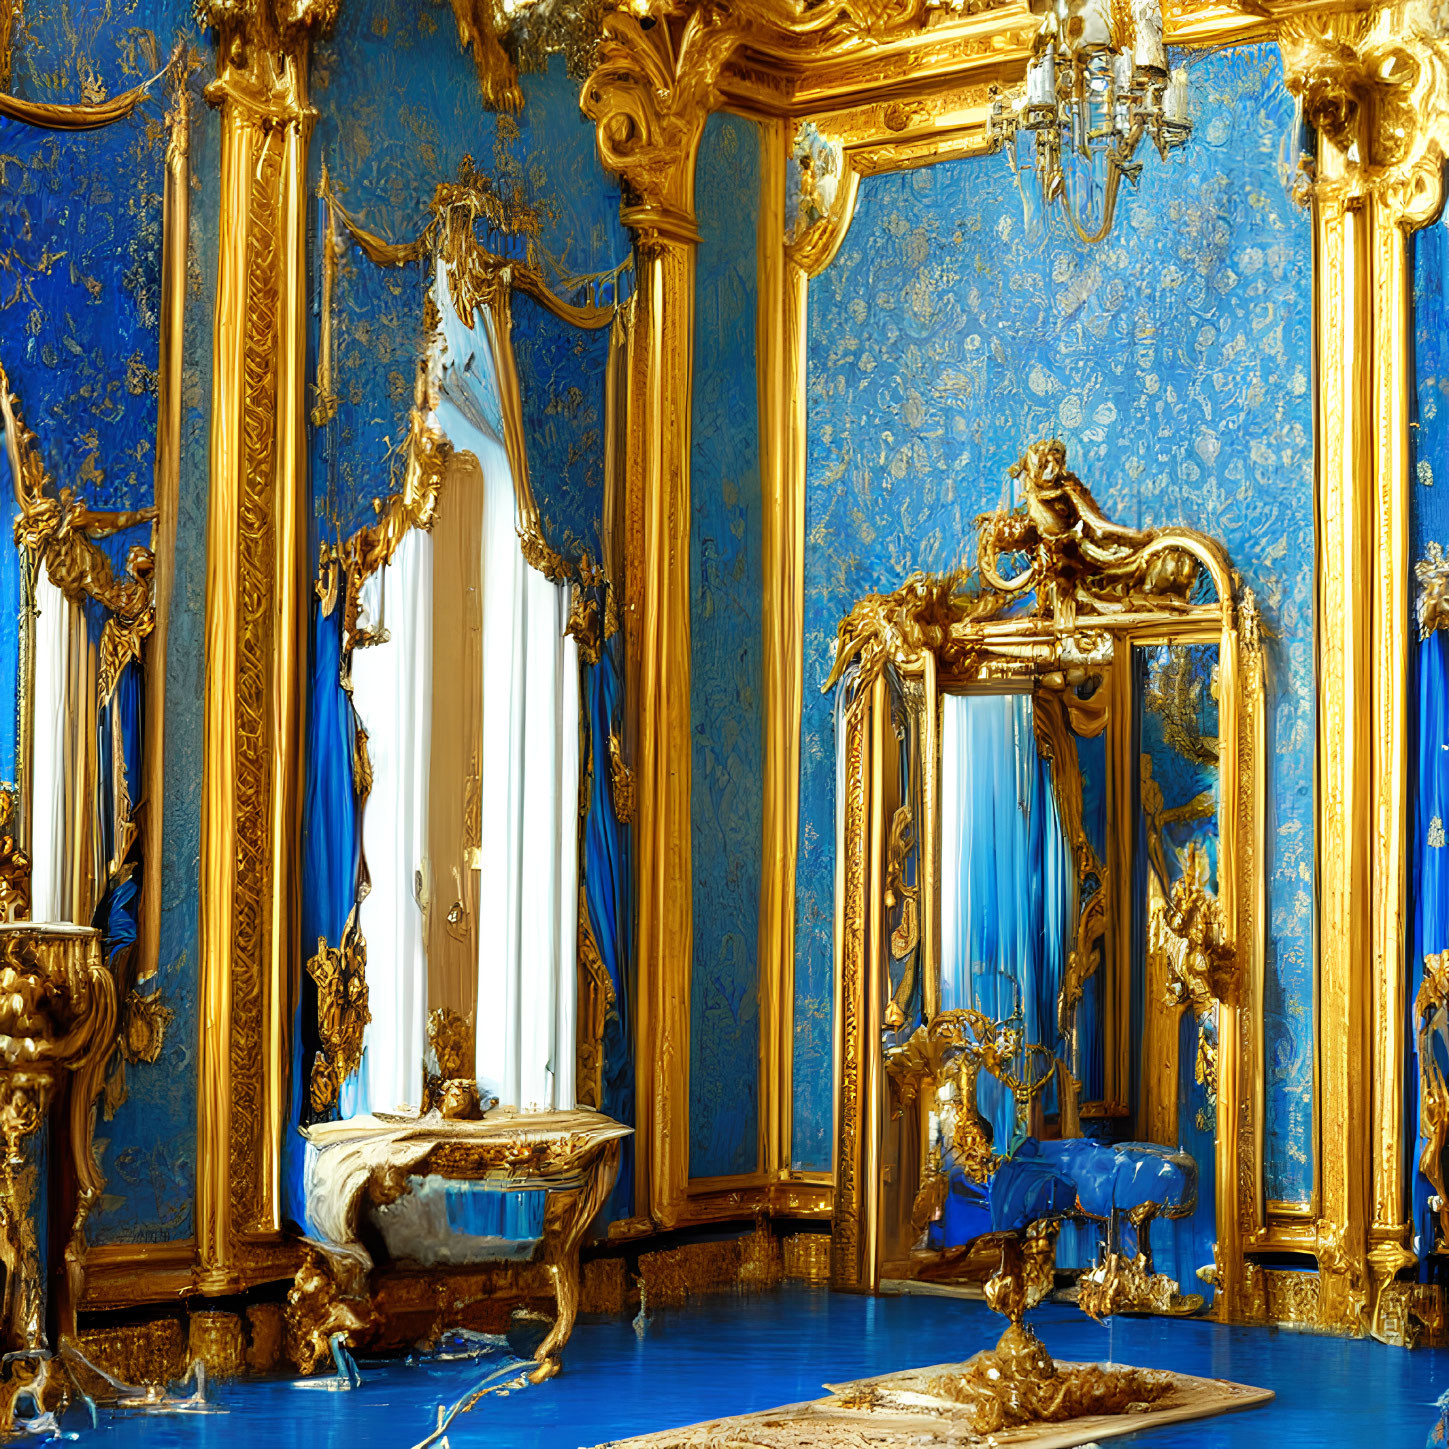 Luxurious Blue and Gold Decor in Opulent Room